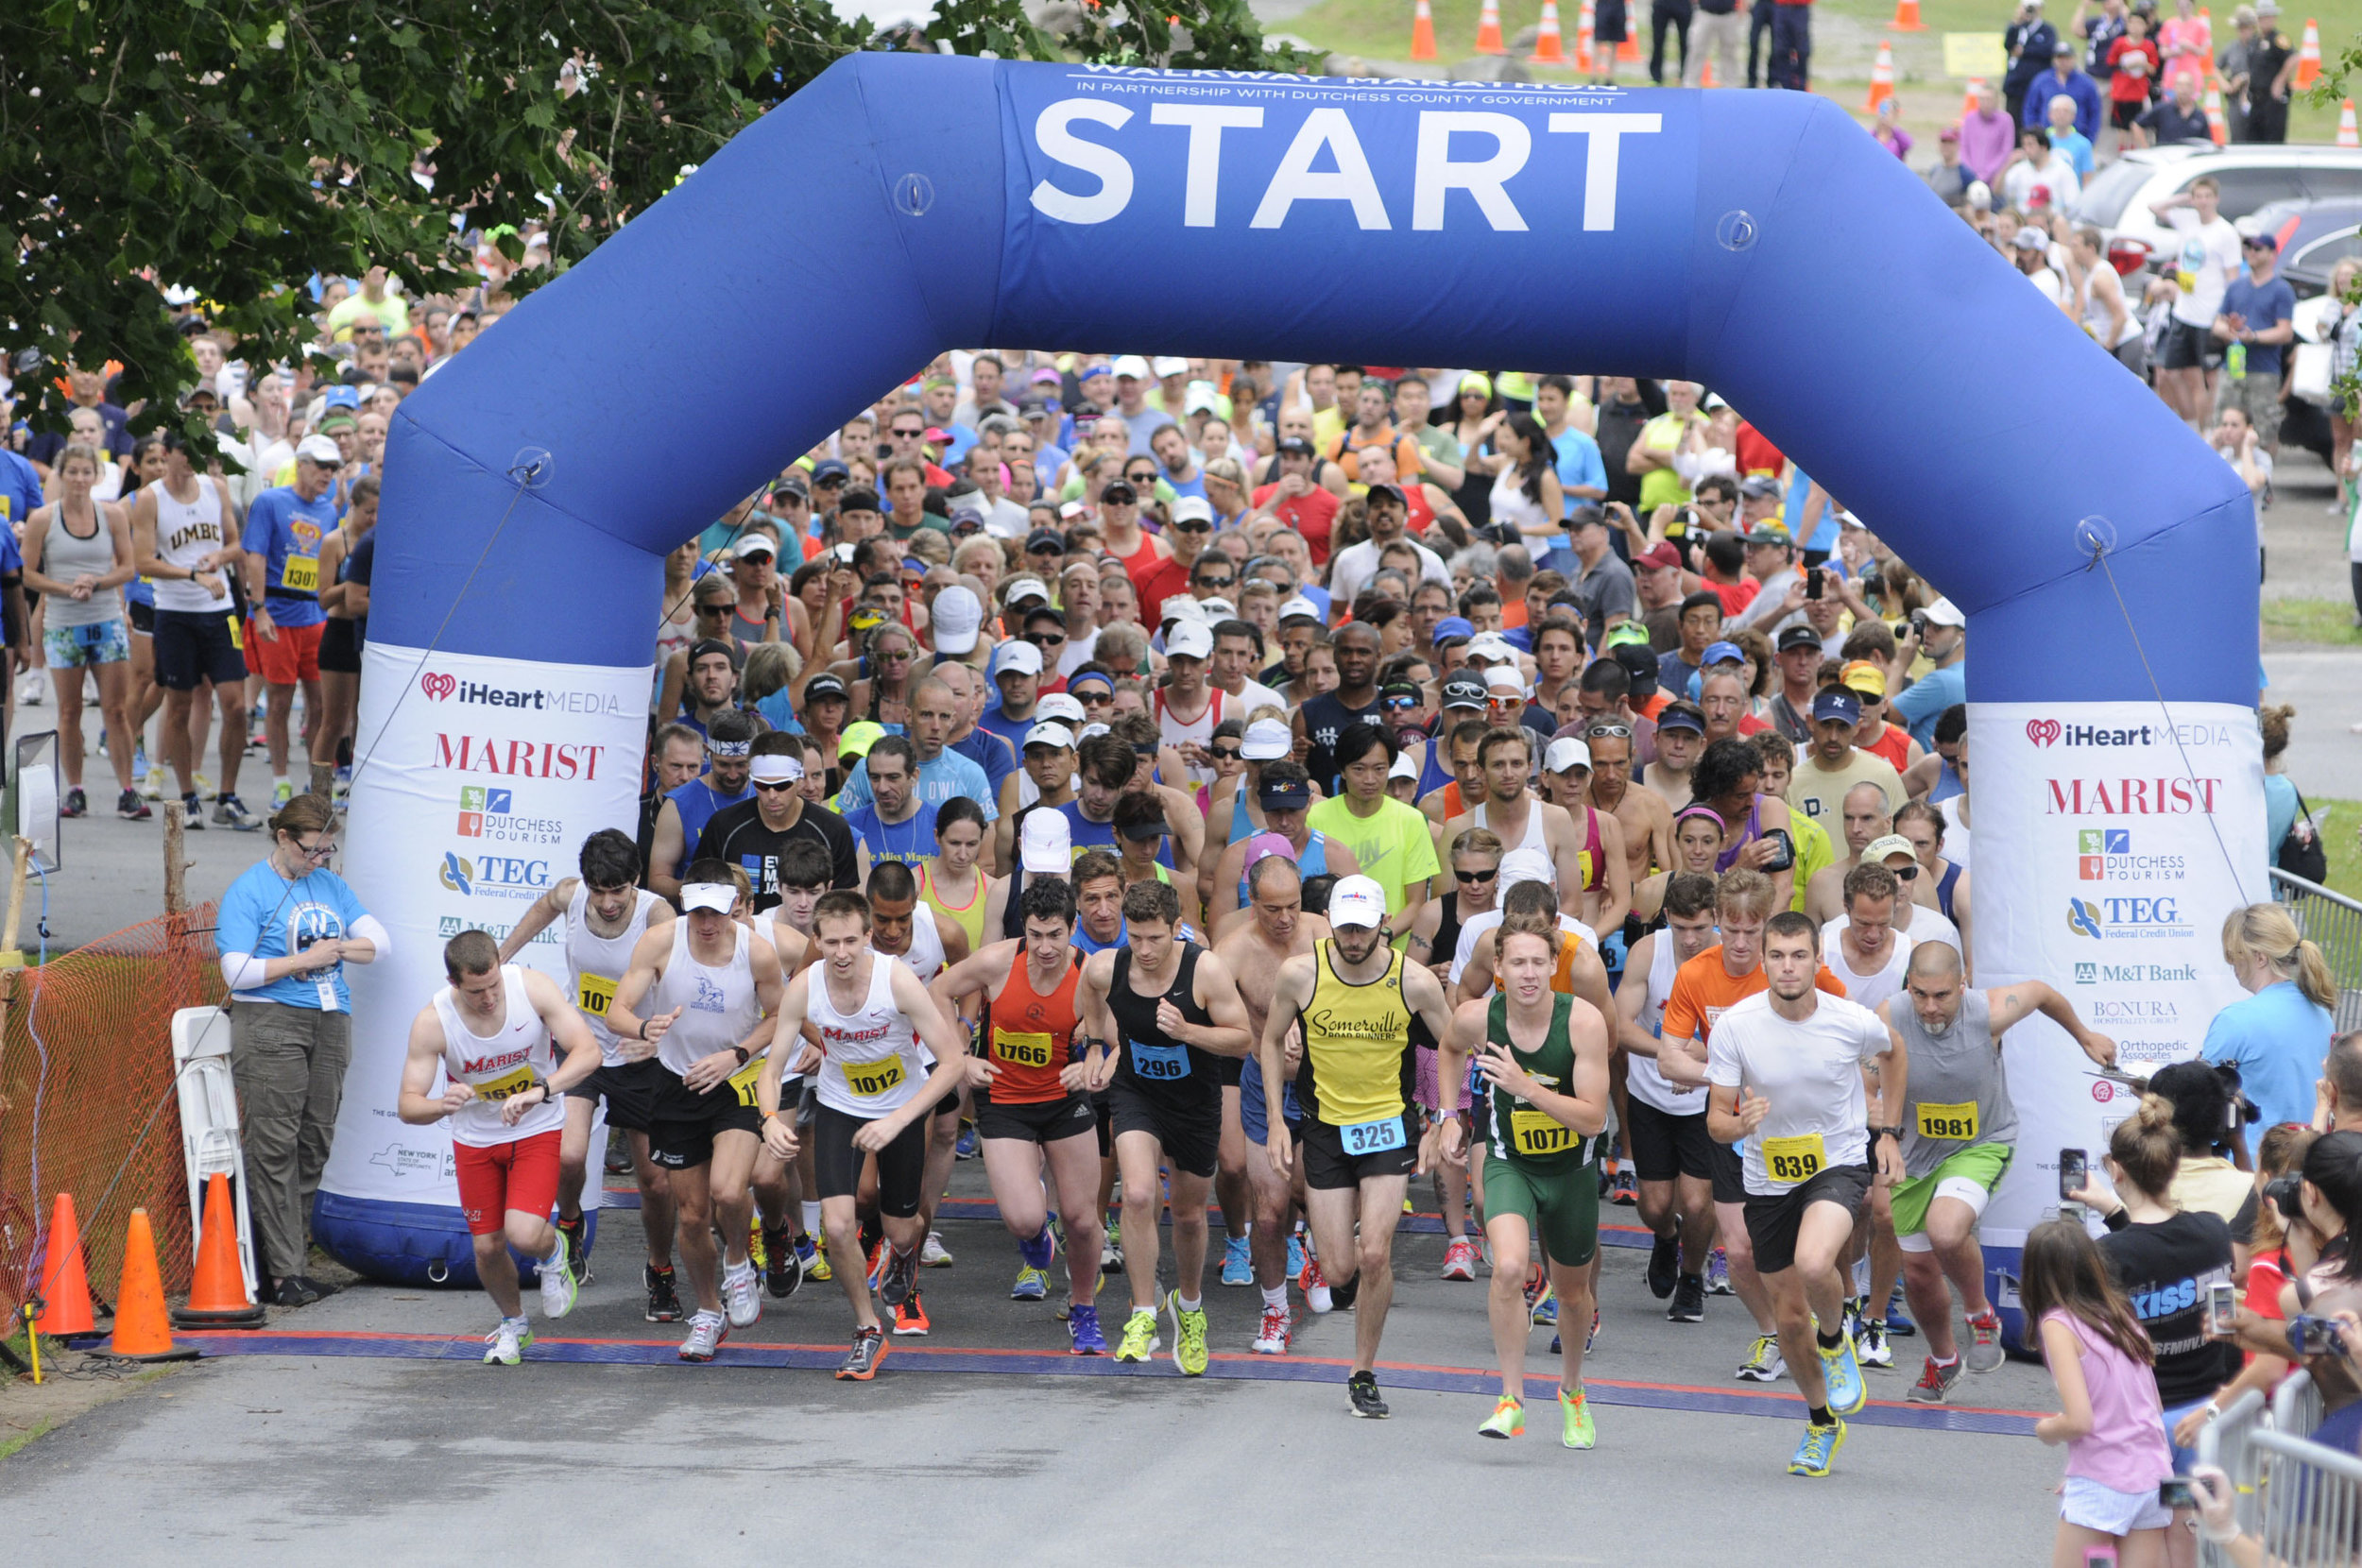  6/13/2015 - Poughkeepsie, NY - Runners begin the Walkway Marathon on the eastern bank of the Hudson River in Poughkeepsie, near Marist College's Boathouse. 